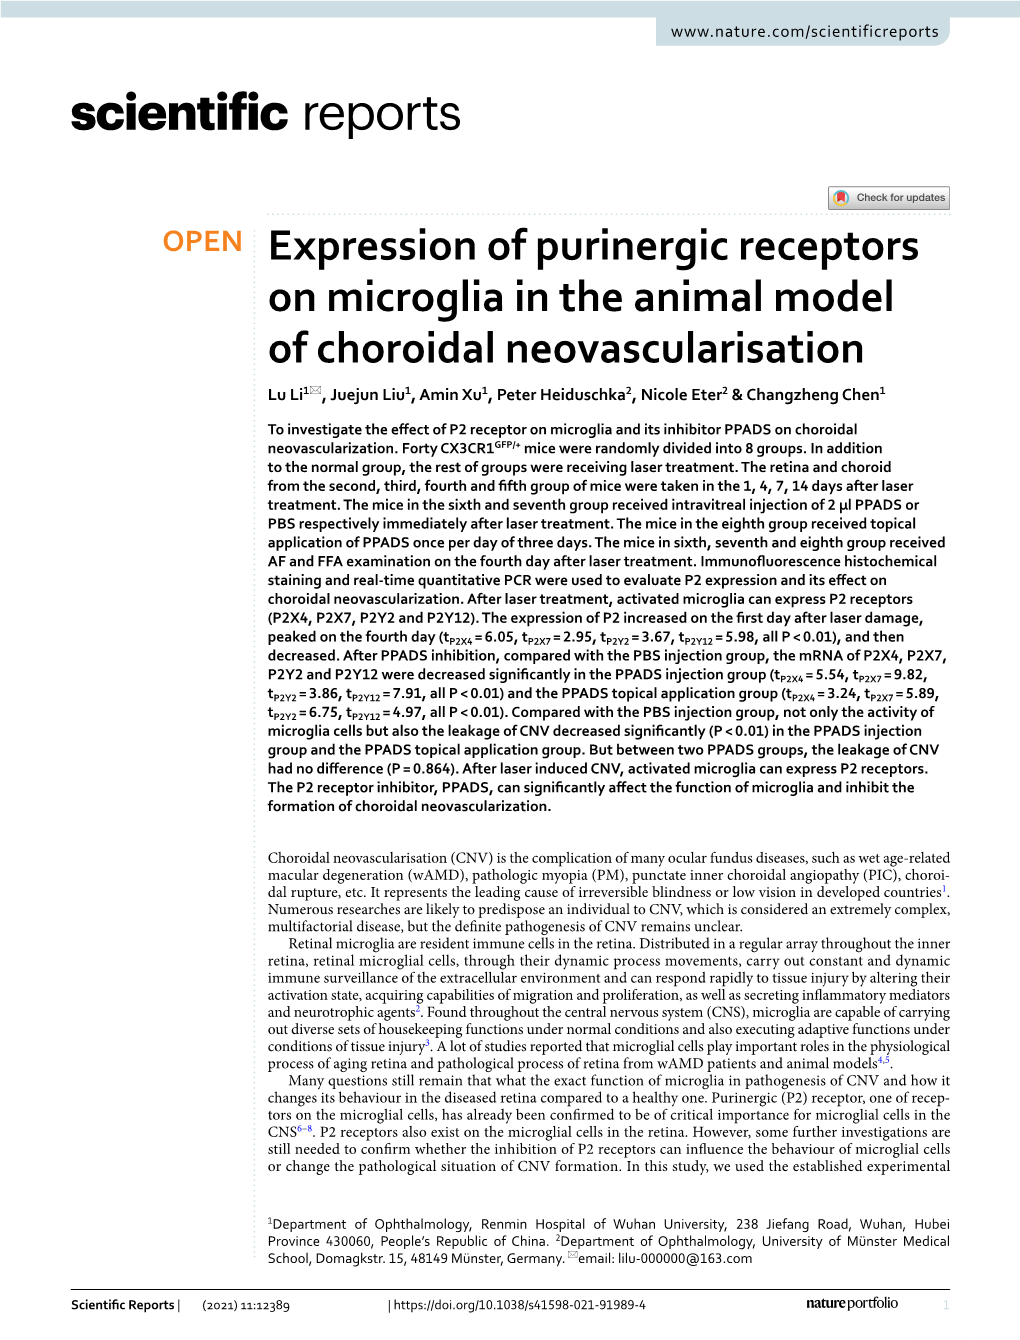 Expression of Purinergic Receptors on Microglia in the Animal Model Of